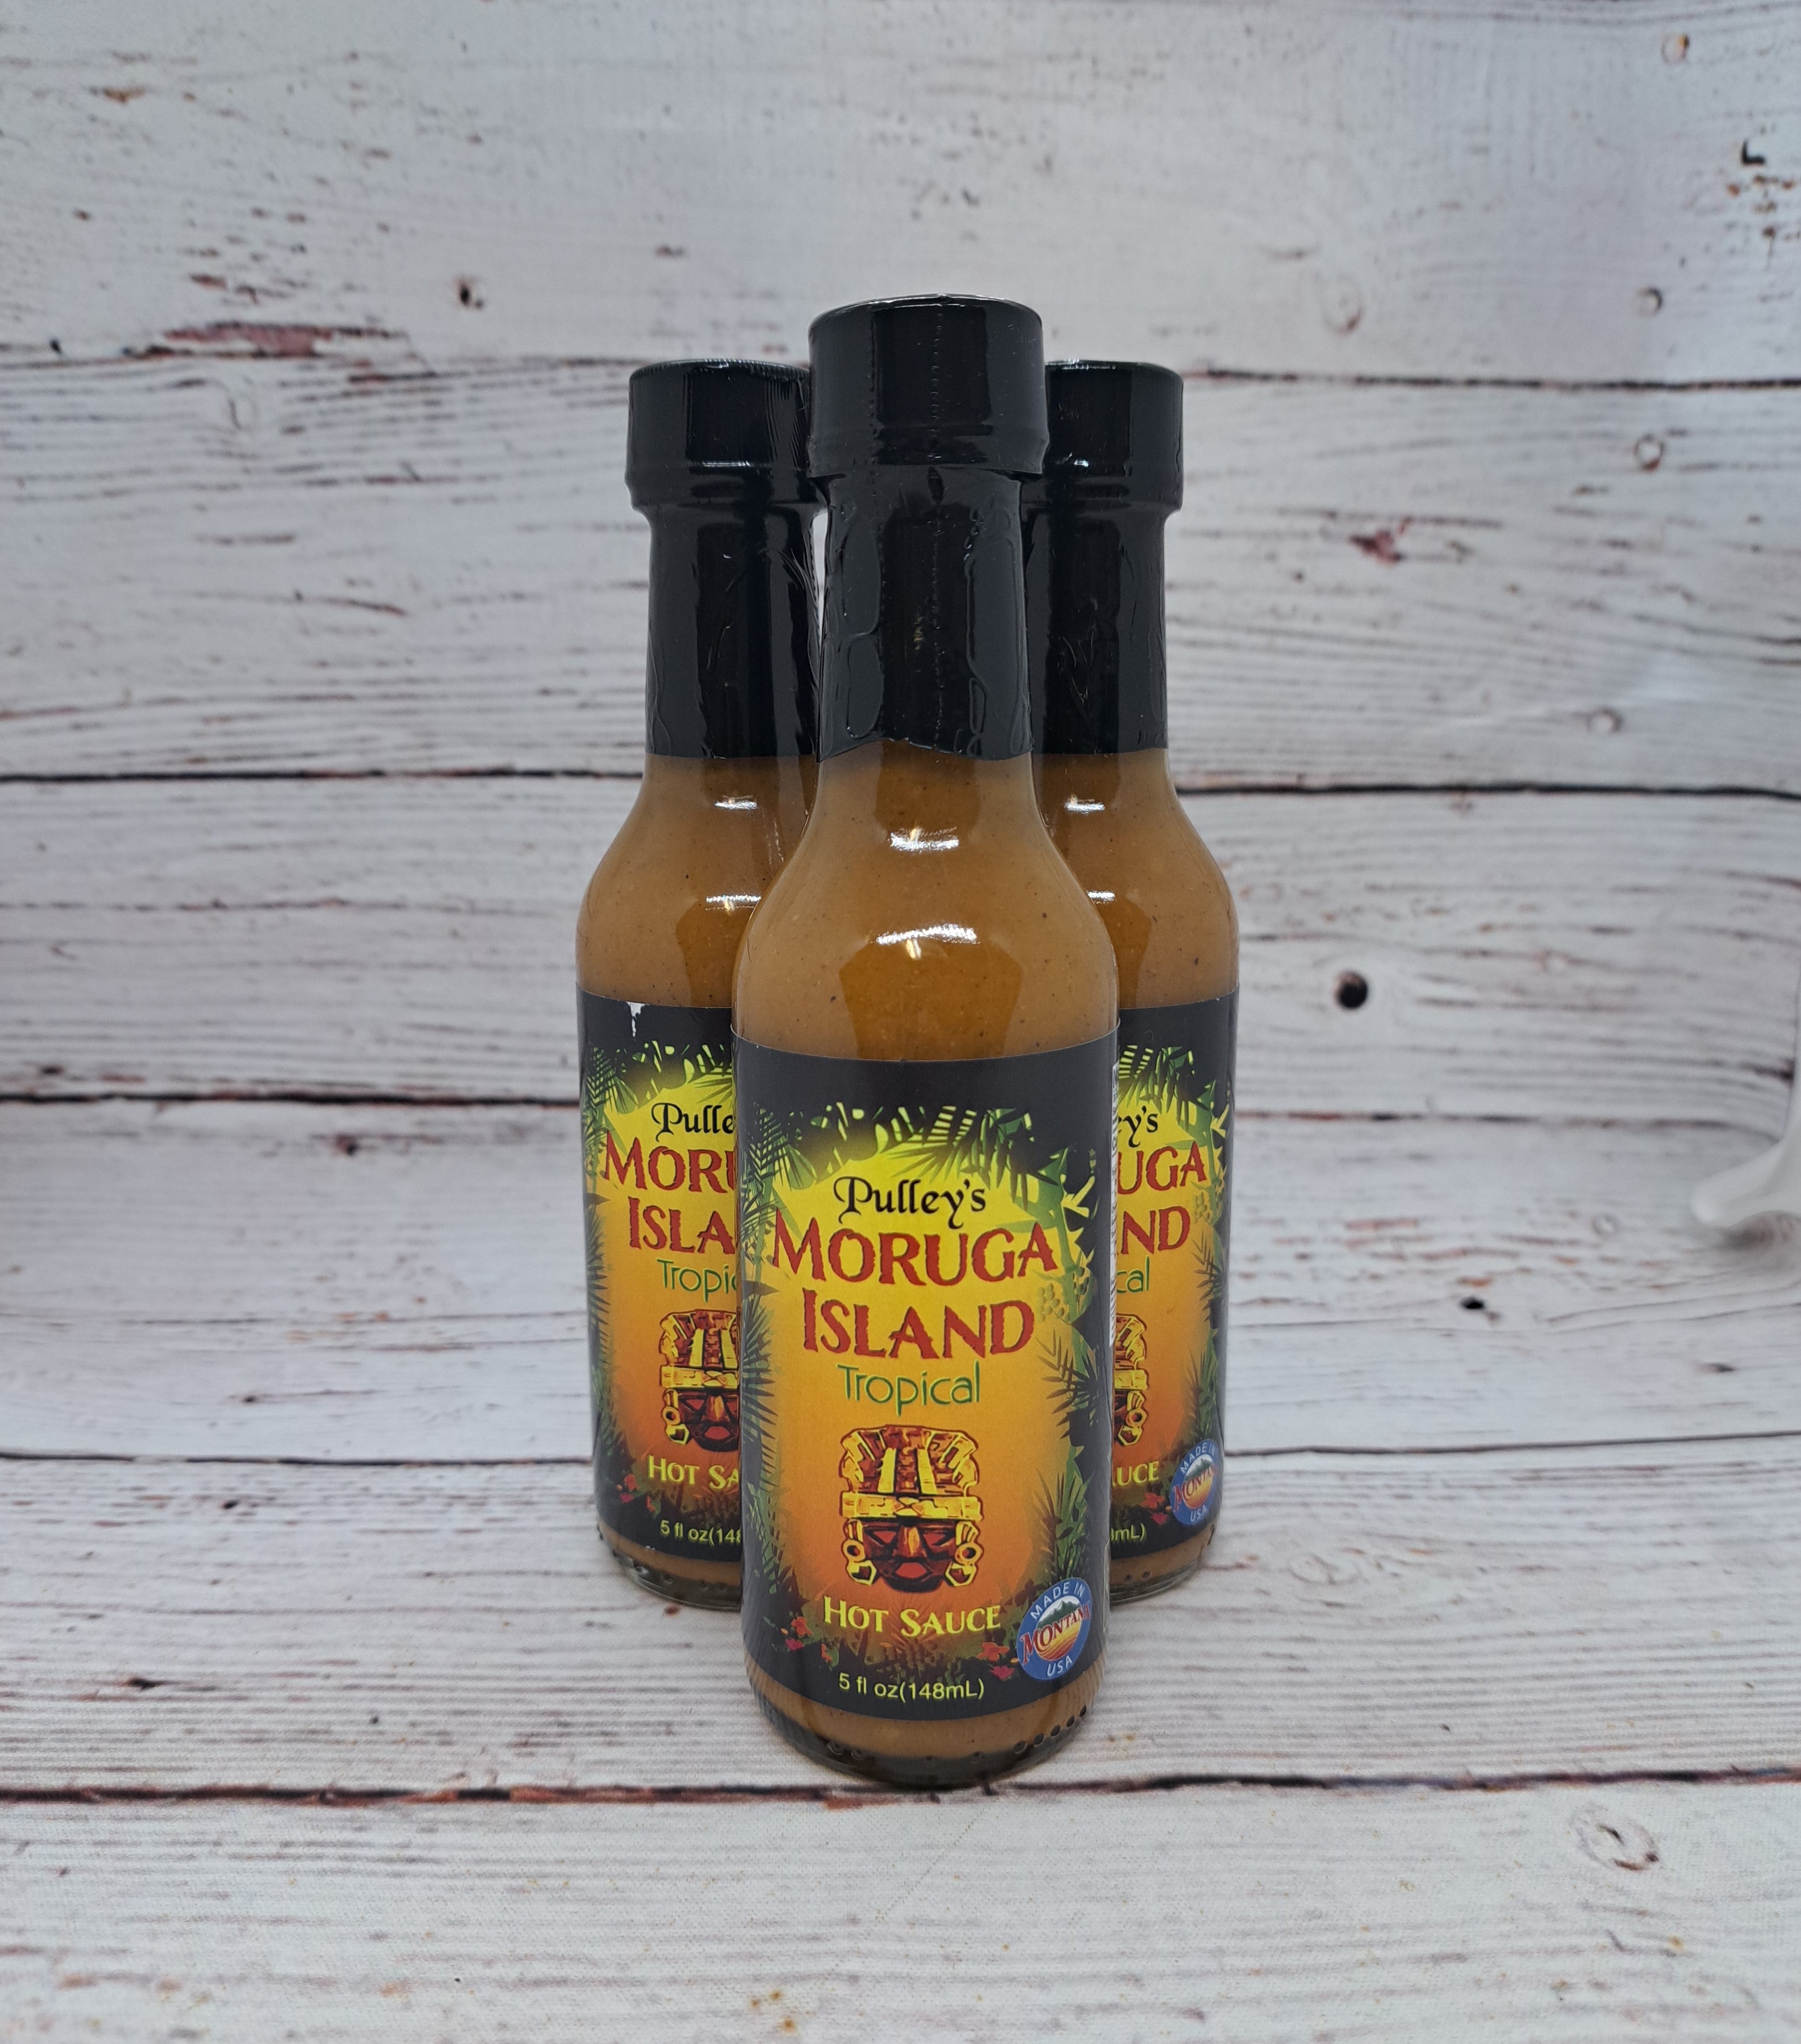 Pulley's Moruga Island Tropical Style Hot Sauce